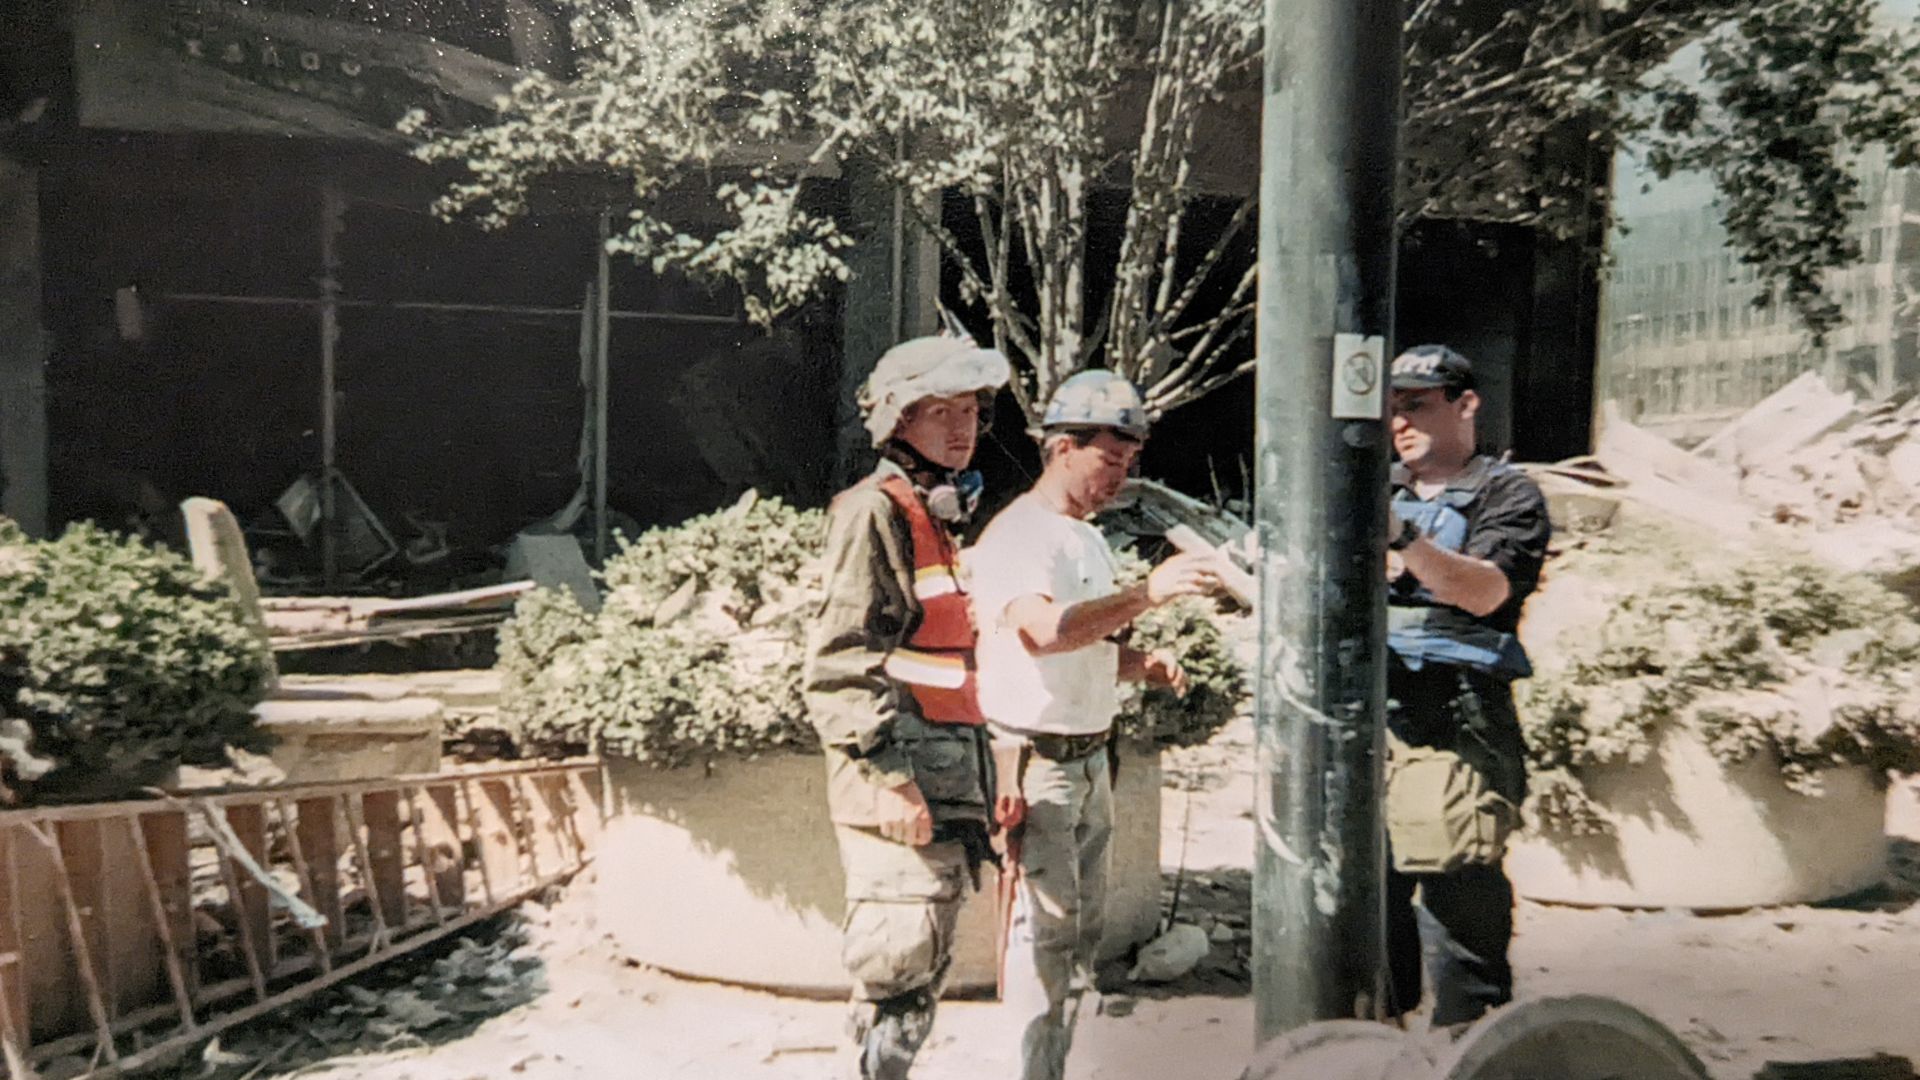 A man in a hard hat and one in army gear stand near a pole at Ground Zero